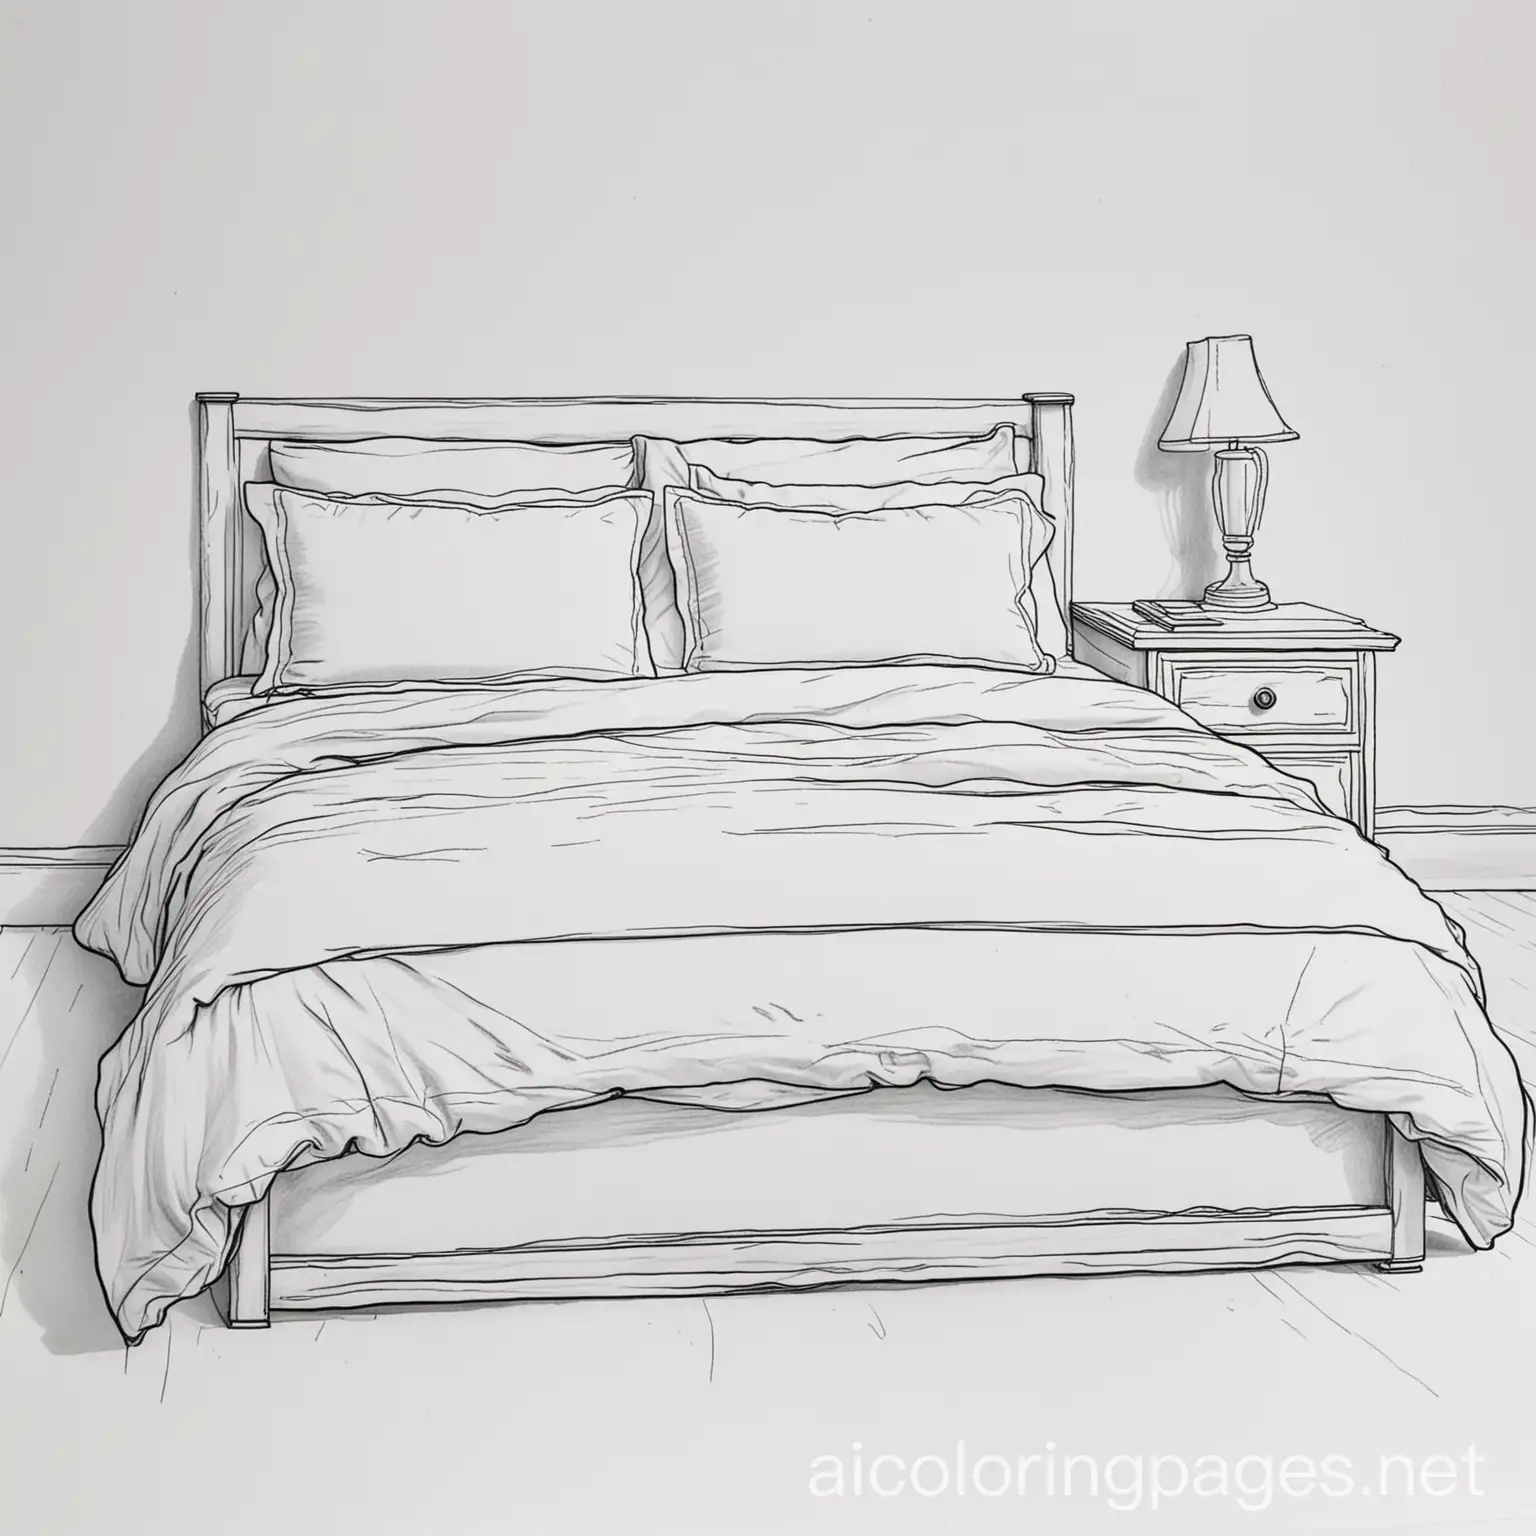 Simple-Line-Art-Coloring-Page-of-a-Bed-on-White-Background